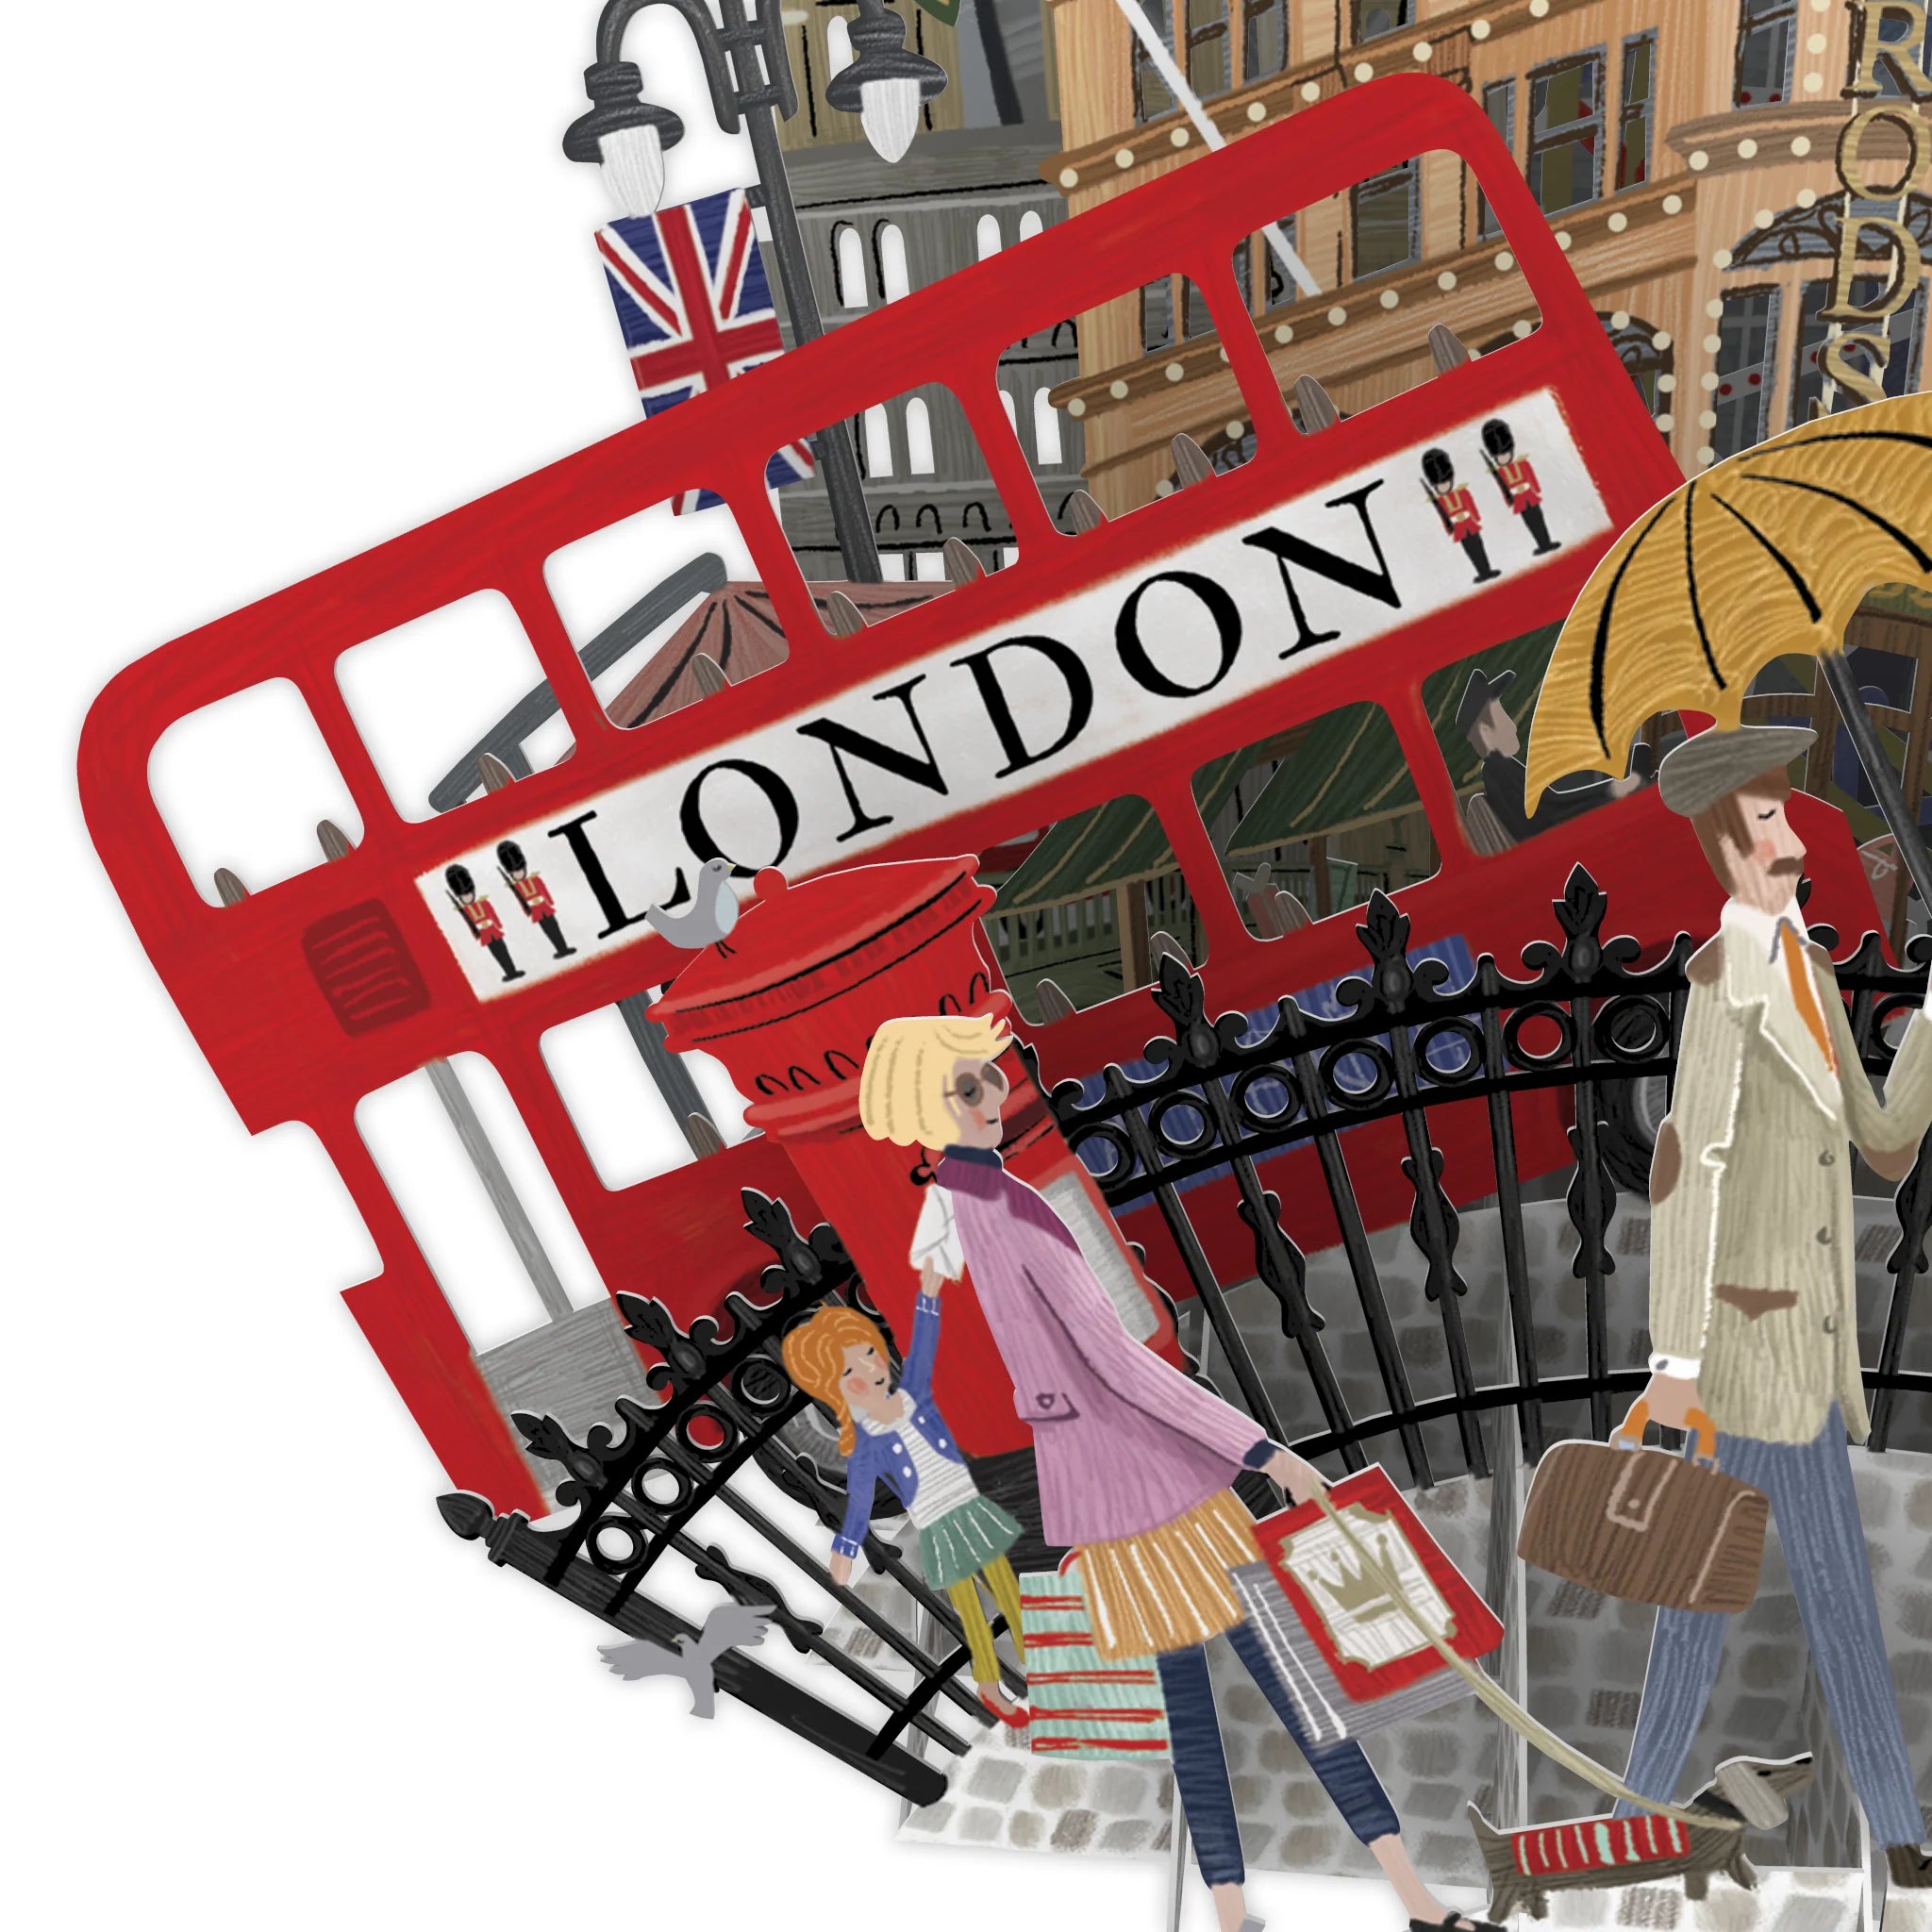 &quot;London&quot; - Top of the World Pop Up Greetings Card